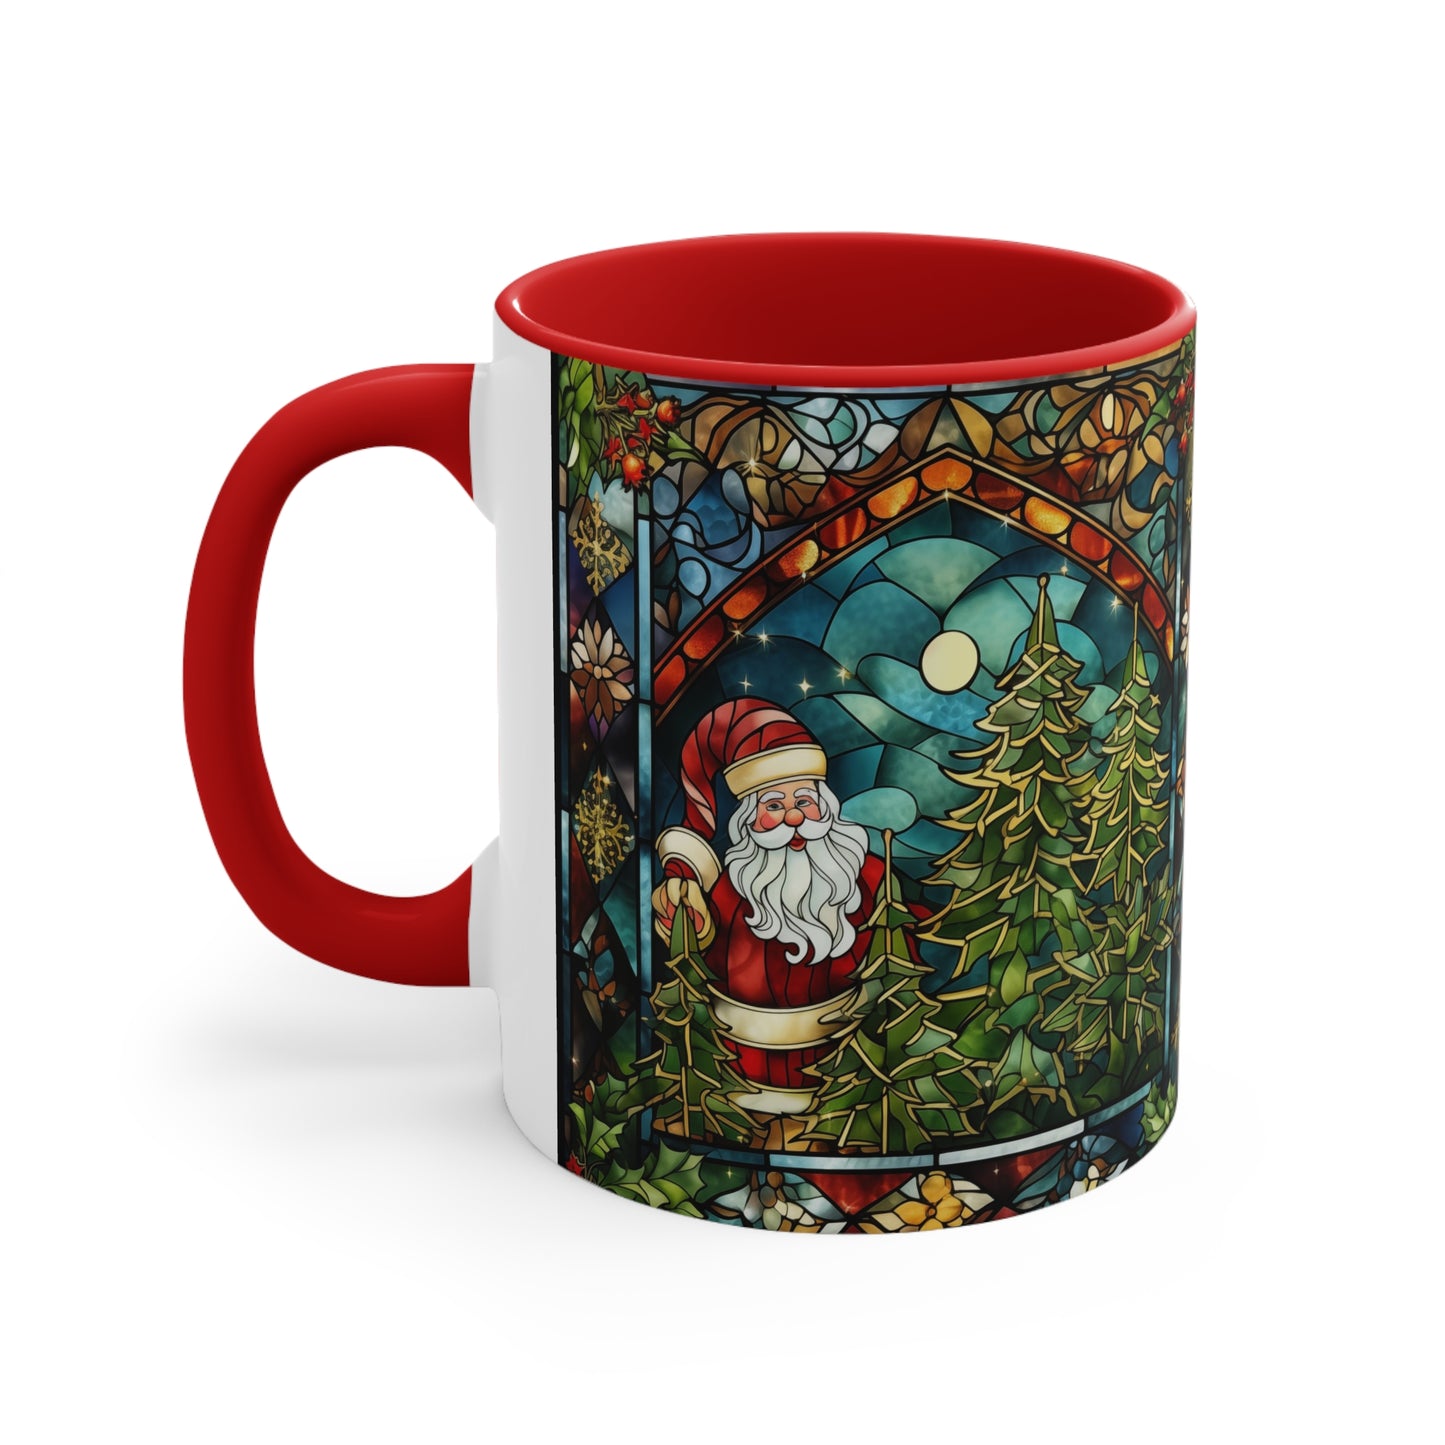 Santa Clause in the moonlight with Christmas Trees | Ceramic Mug